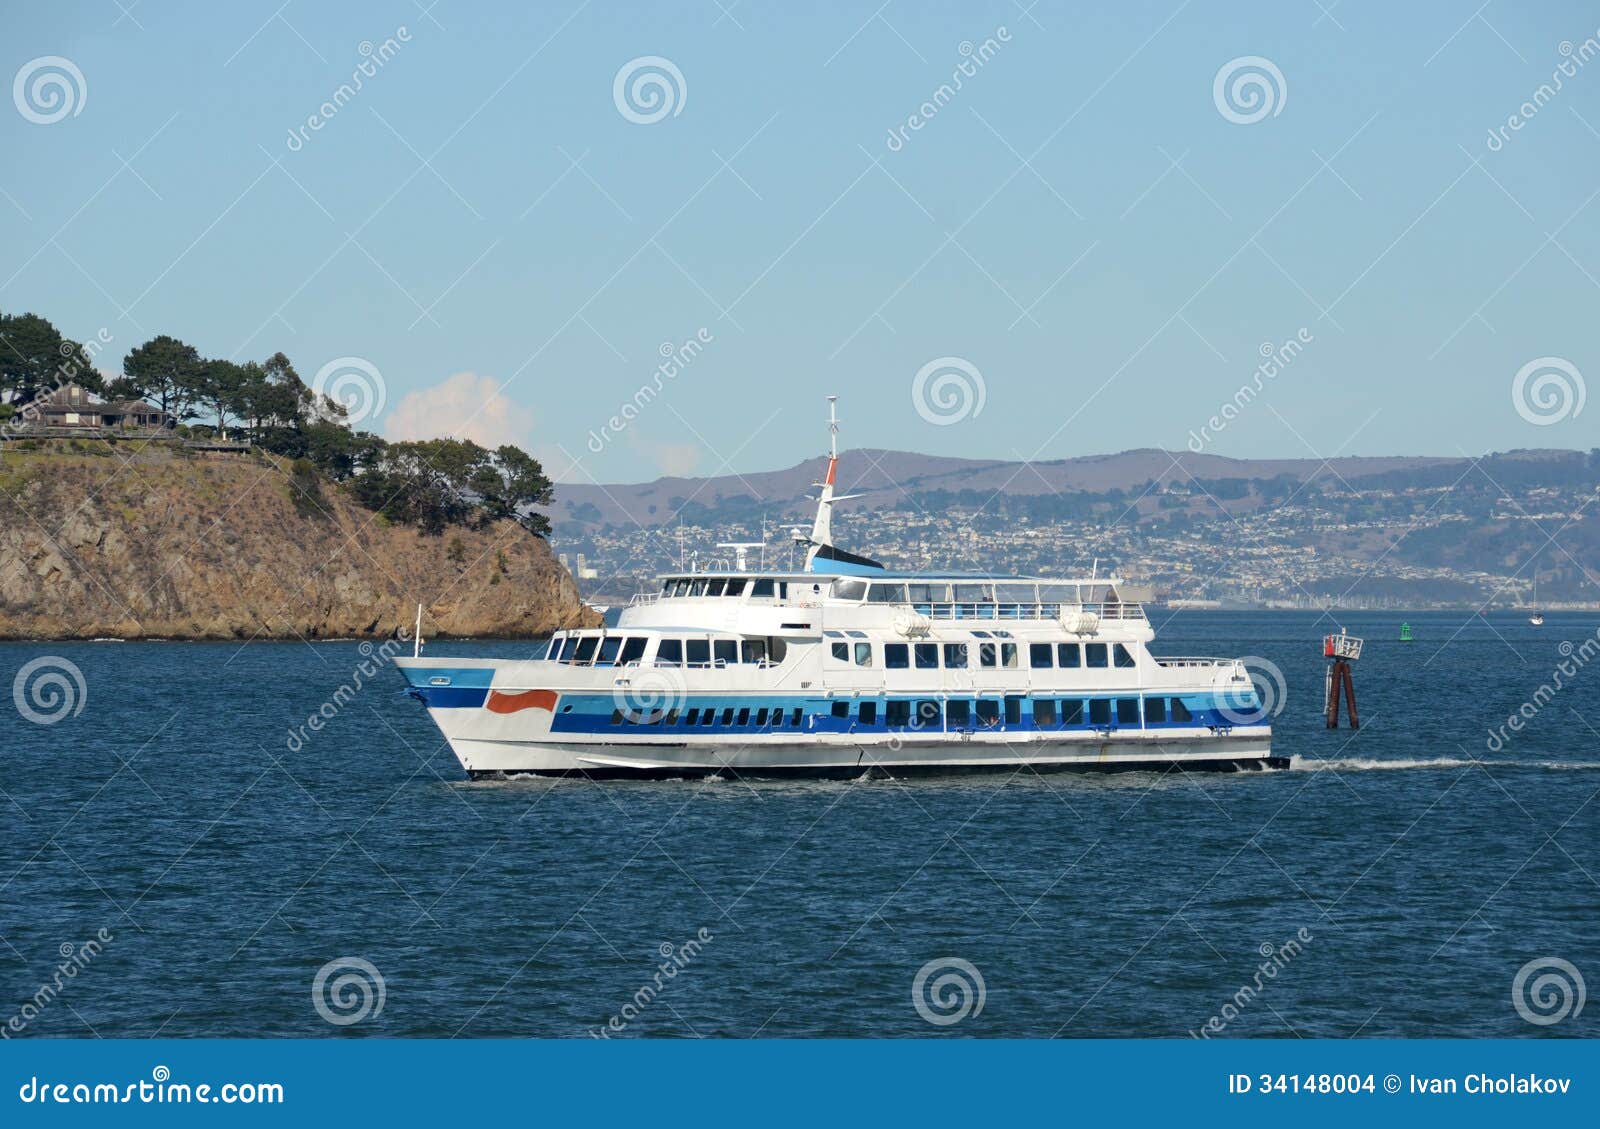 Ferry Boat In San Francisco Stock Images - Image: 34148004